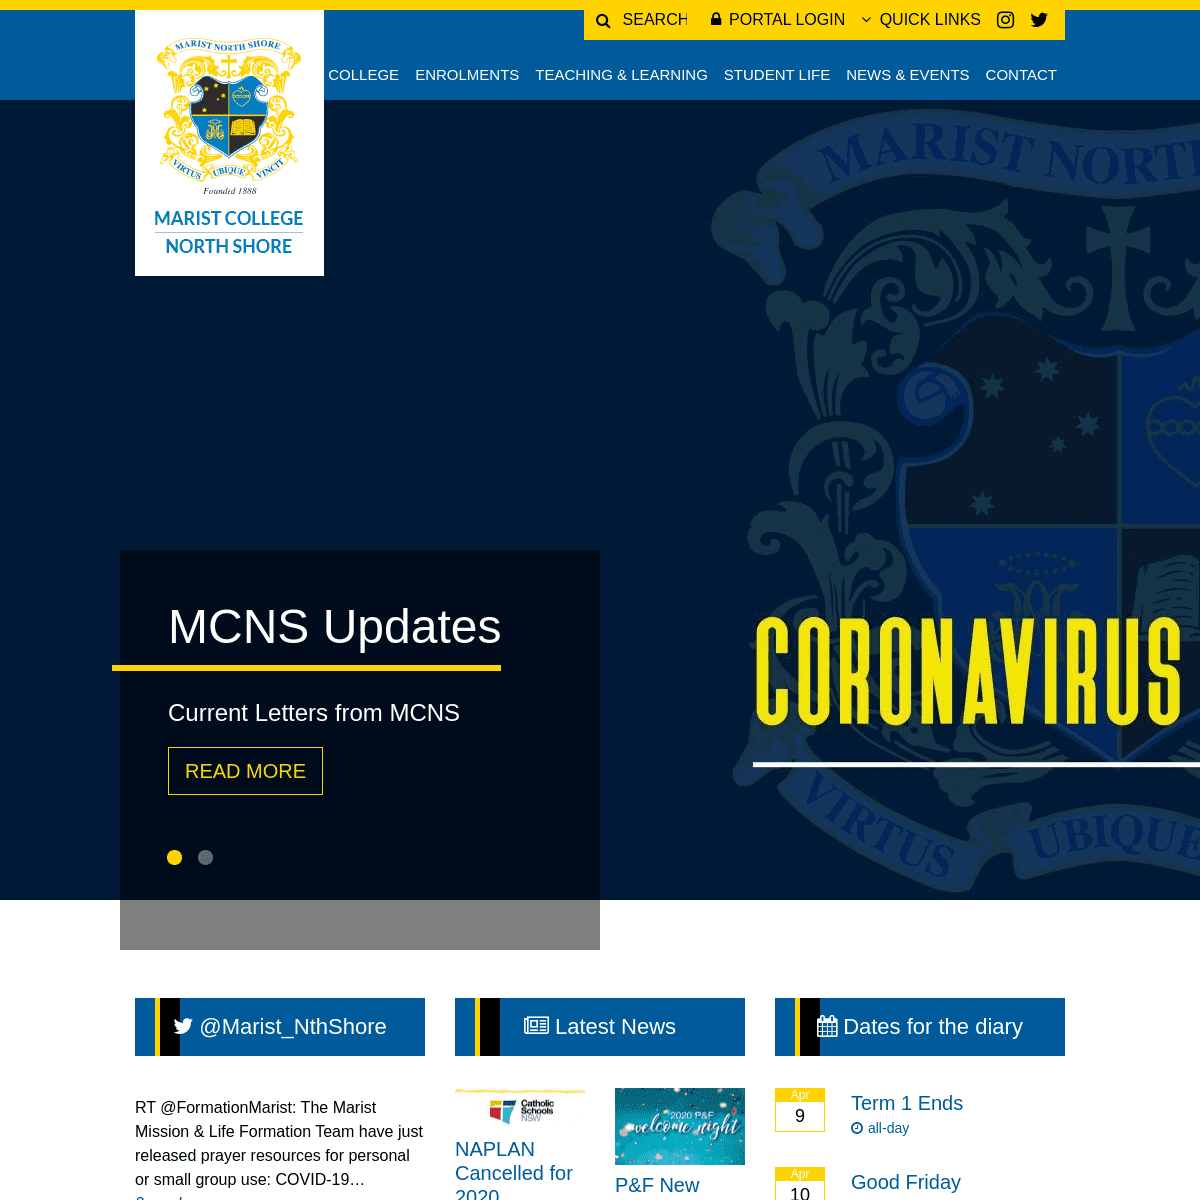 A complete backup of maristcollege.com